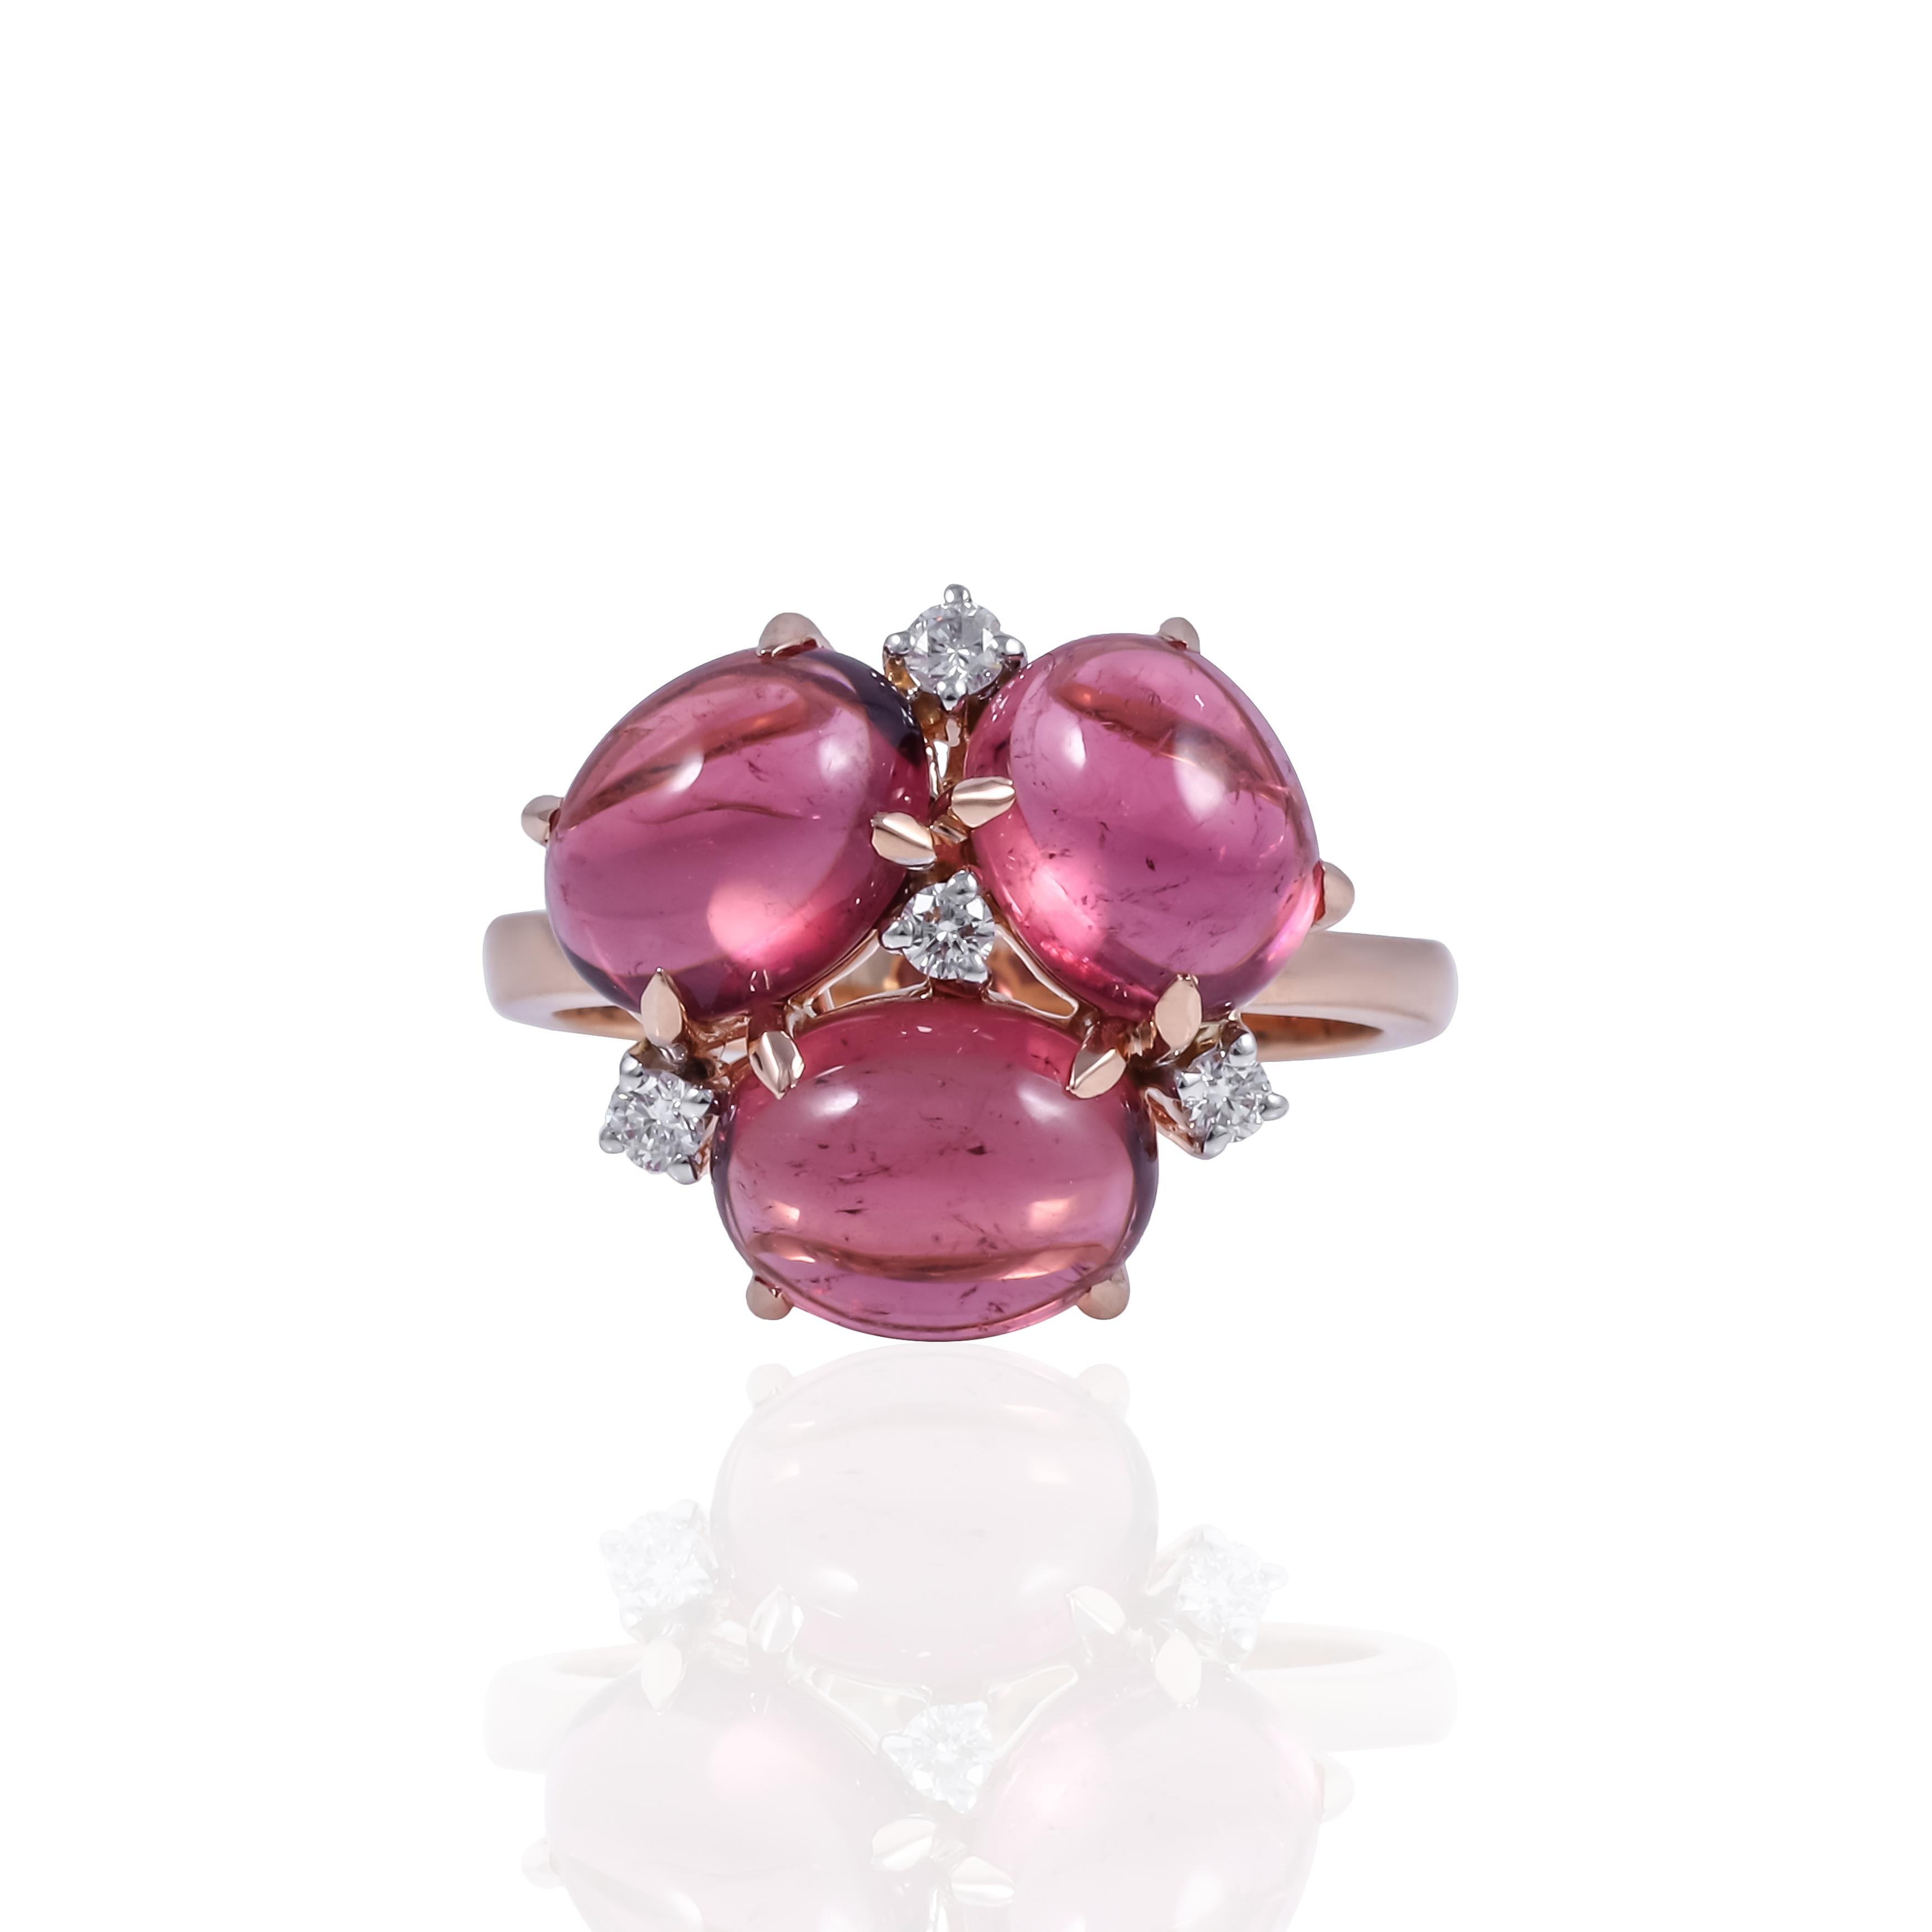 Introducing our breathtaking Pink Tourmaline Trilogy Ring – a triple threat of elegance, style, and sparkle! This ring features a three stunning pink tourmaline stones, all of identical shape, size and colour totalling 5.92 carats altogether, for a